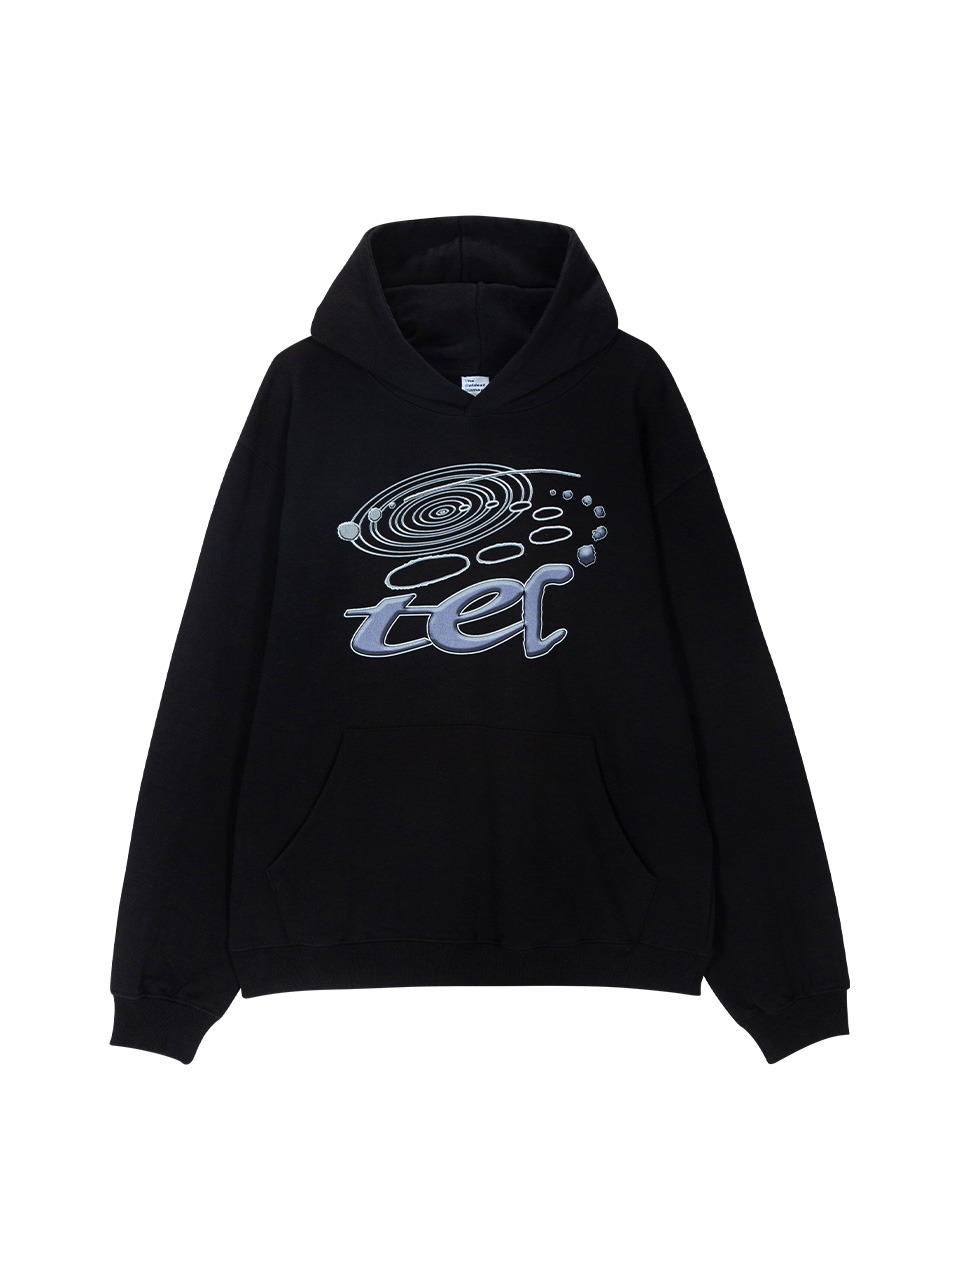 THECOLDESTMOMENT - TCM TEL HOODIE